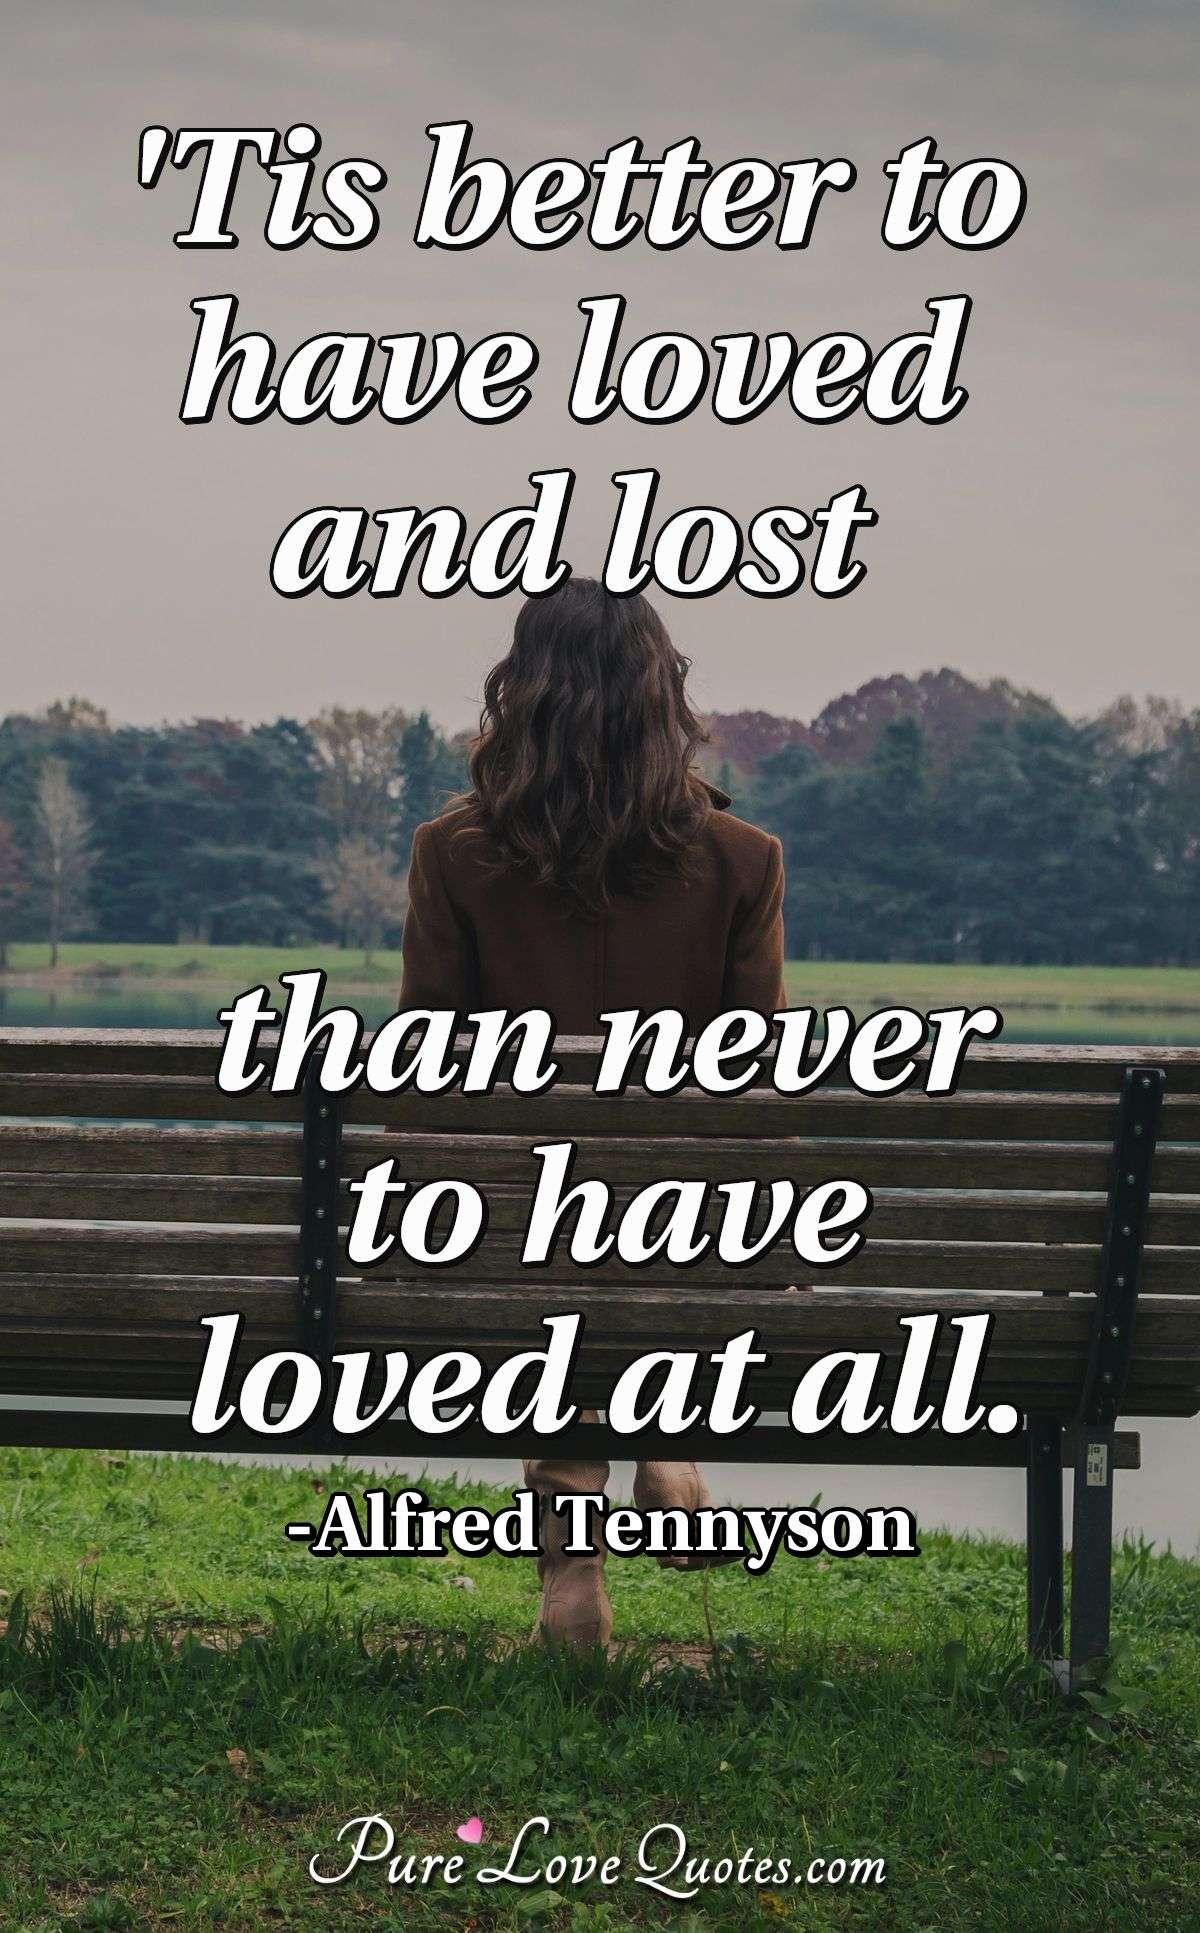 'Tis better to have loved and lost than never to have loved at all. - Alfred Tennyson